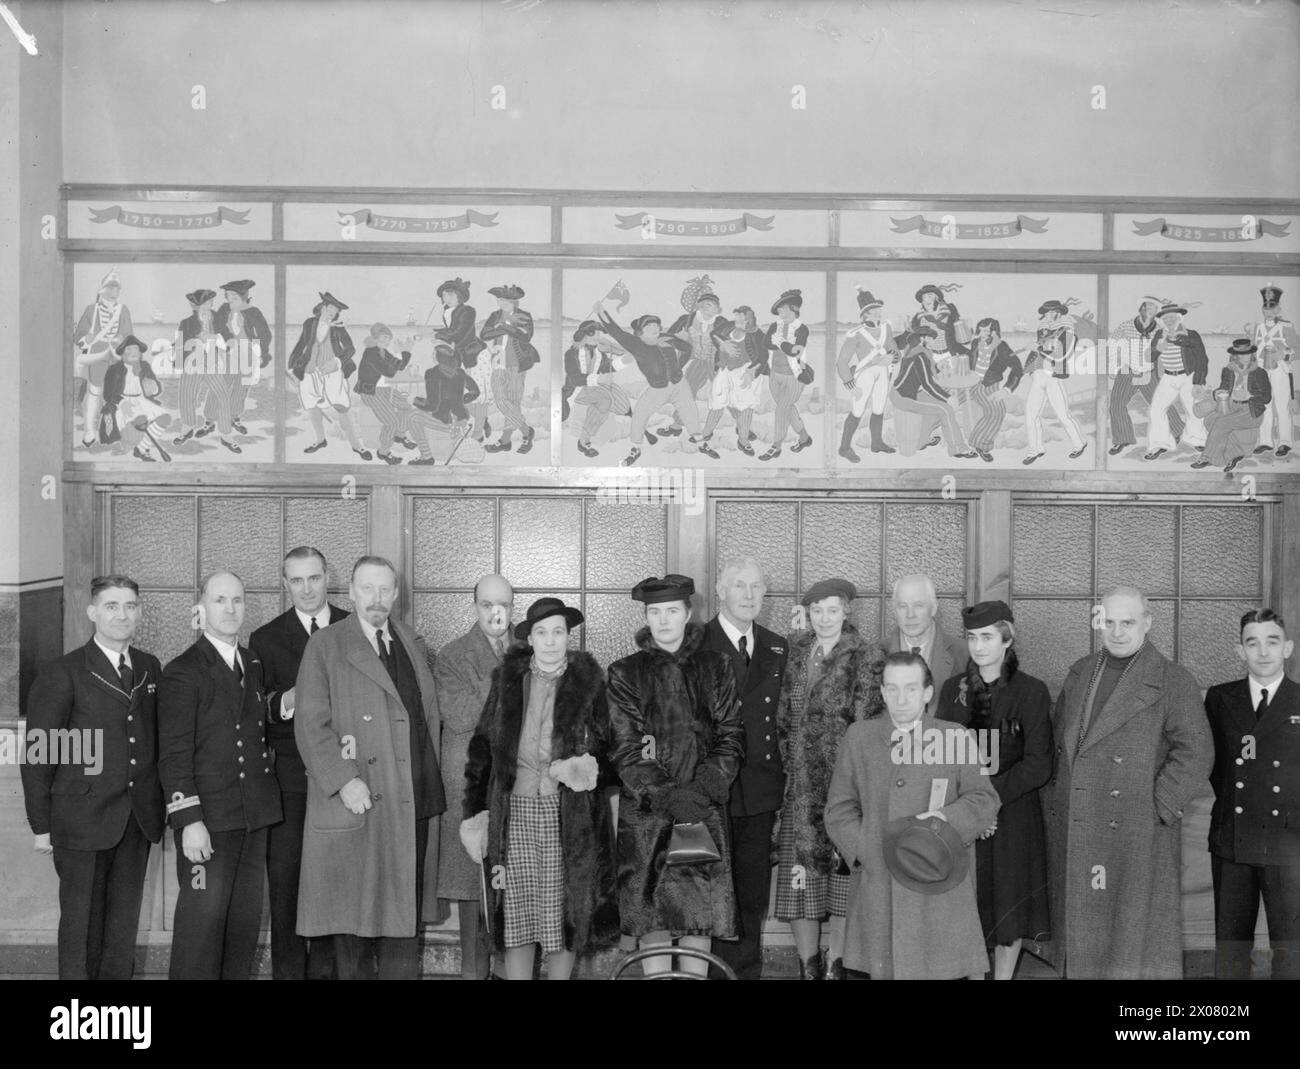 FAMOUS SCOTTISH ARTISTS VISIT A NAVAL CANTEEN. 21 JANUARY 1942, ROSYTH. SEVERAL WELL KNOWN ARTISTS VISITED A ROYAL NAVAL AND ROYAL MARINE CANTEEN, AND PAINTED THREE PANELS BY WAY OF A DECORATION. THE ARTISTS WERE MRS HASWELL MILLER, ARSA, ANNE REDPATH (NOW MRS MICHIE) AND MRS MARY ARMOUR, ARSA. MR W C HUTCHINSON ALSO VISITED THE CANTEEN TO SIGN HIS PAINTING OF THE BATTLE OF CAMPERDOWN. - The official party with Captain Benson centre, in front of one of the three panels Stock Photo